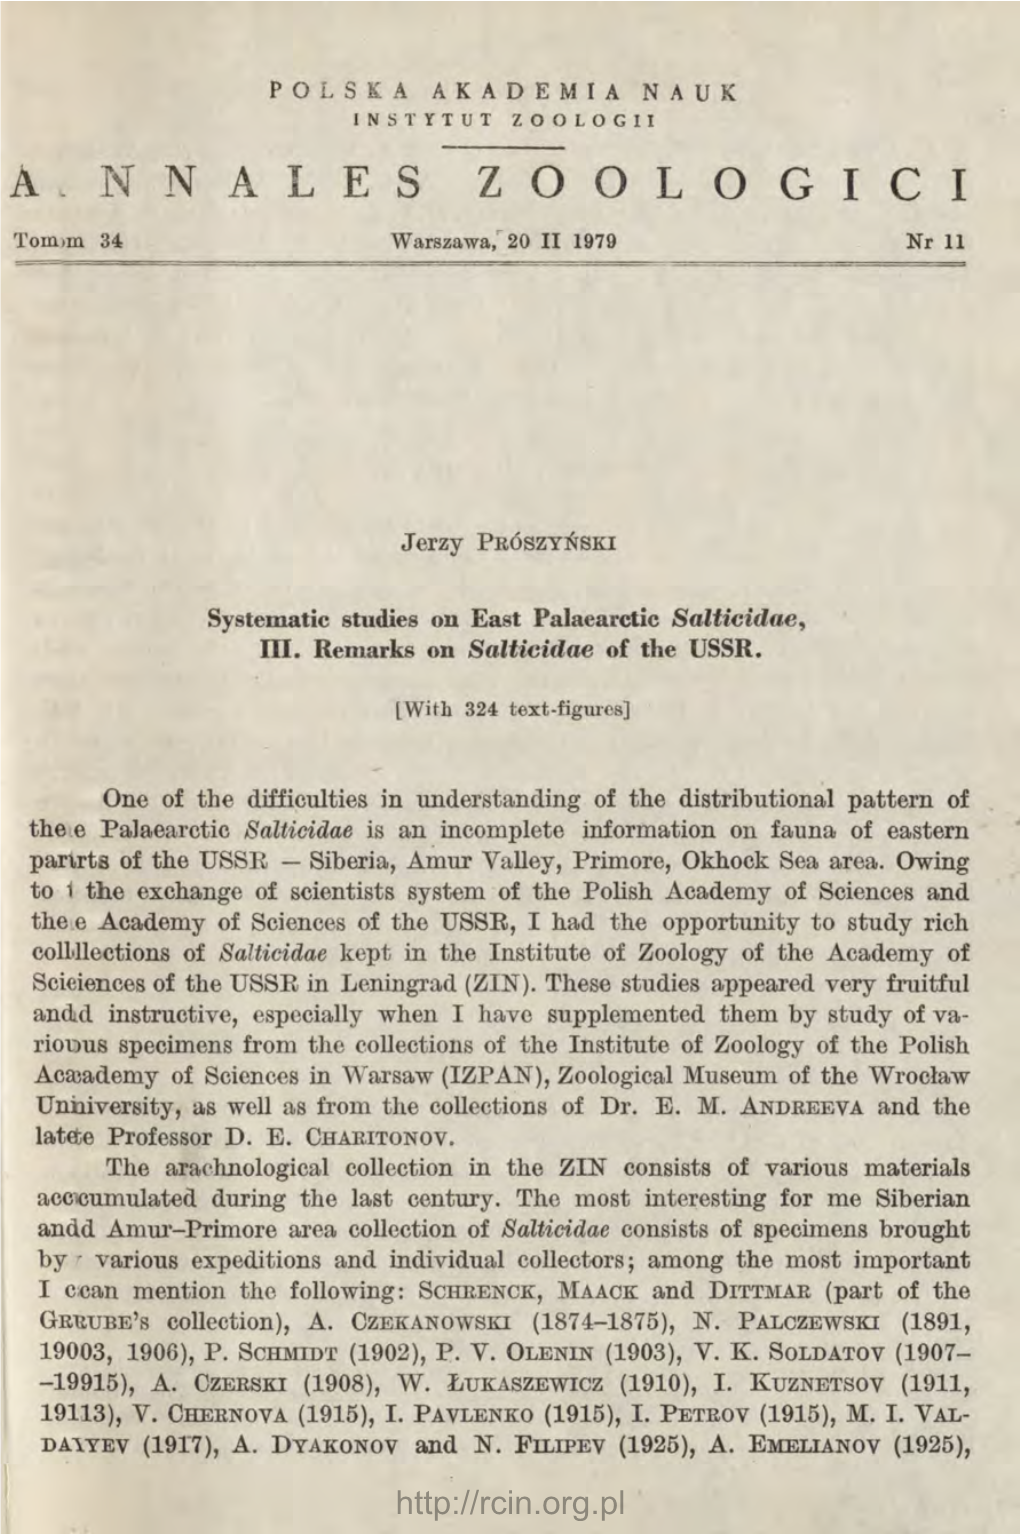 Systematic Studies on East Palaearctic Salticidae. 3, Remarks on Salticidae of the USSR